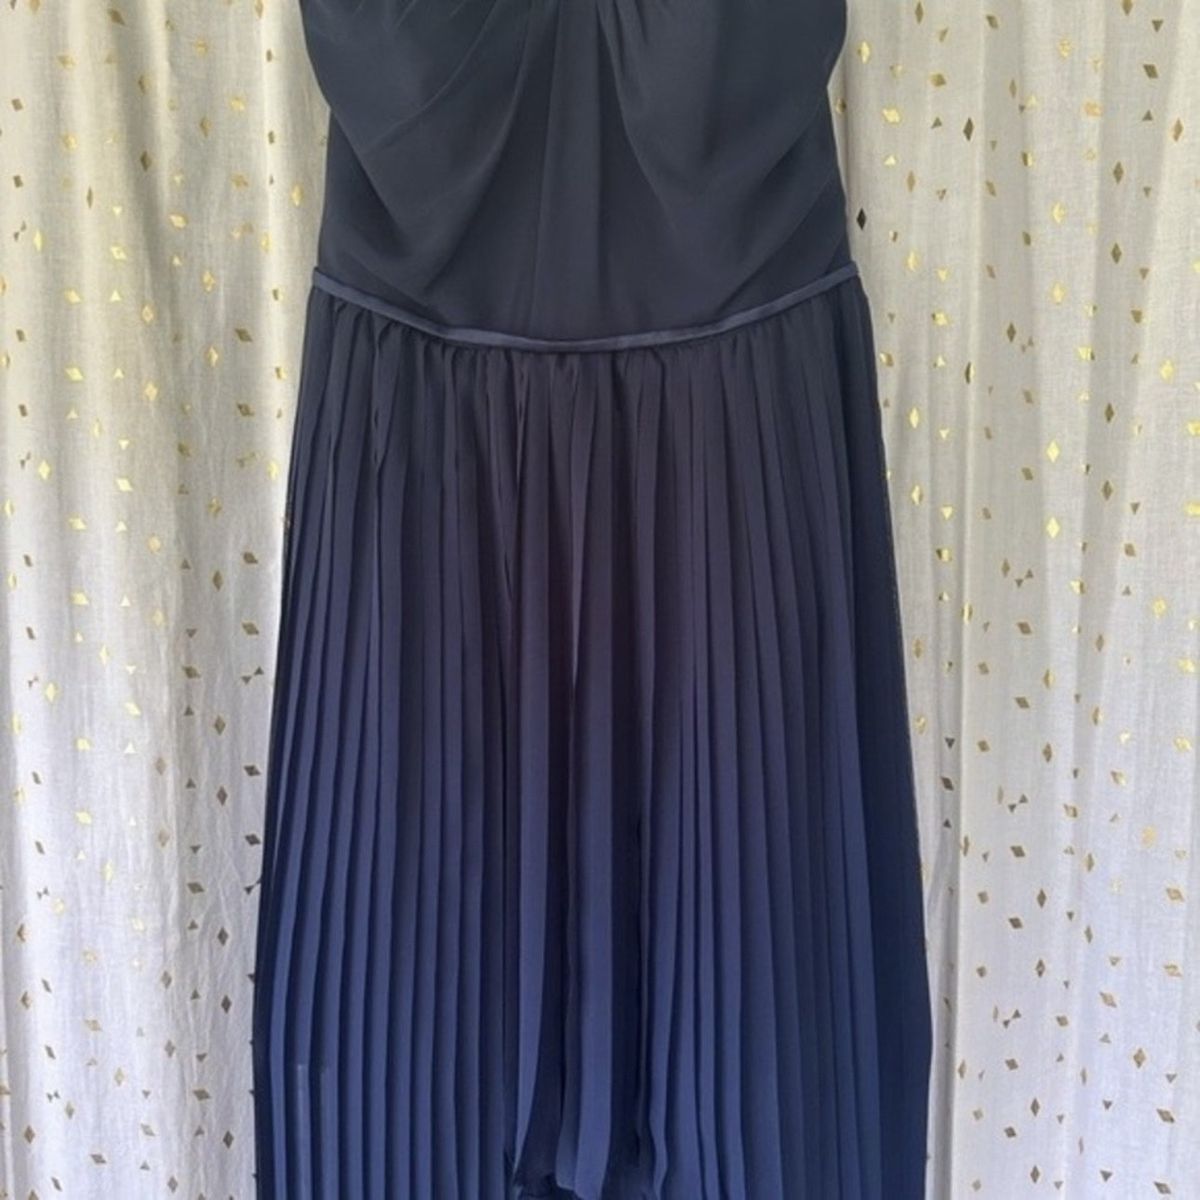 Alfred Angelo Size 12 Prom Halter Navy Blue Cocktail Dress on Queenly